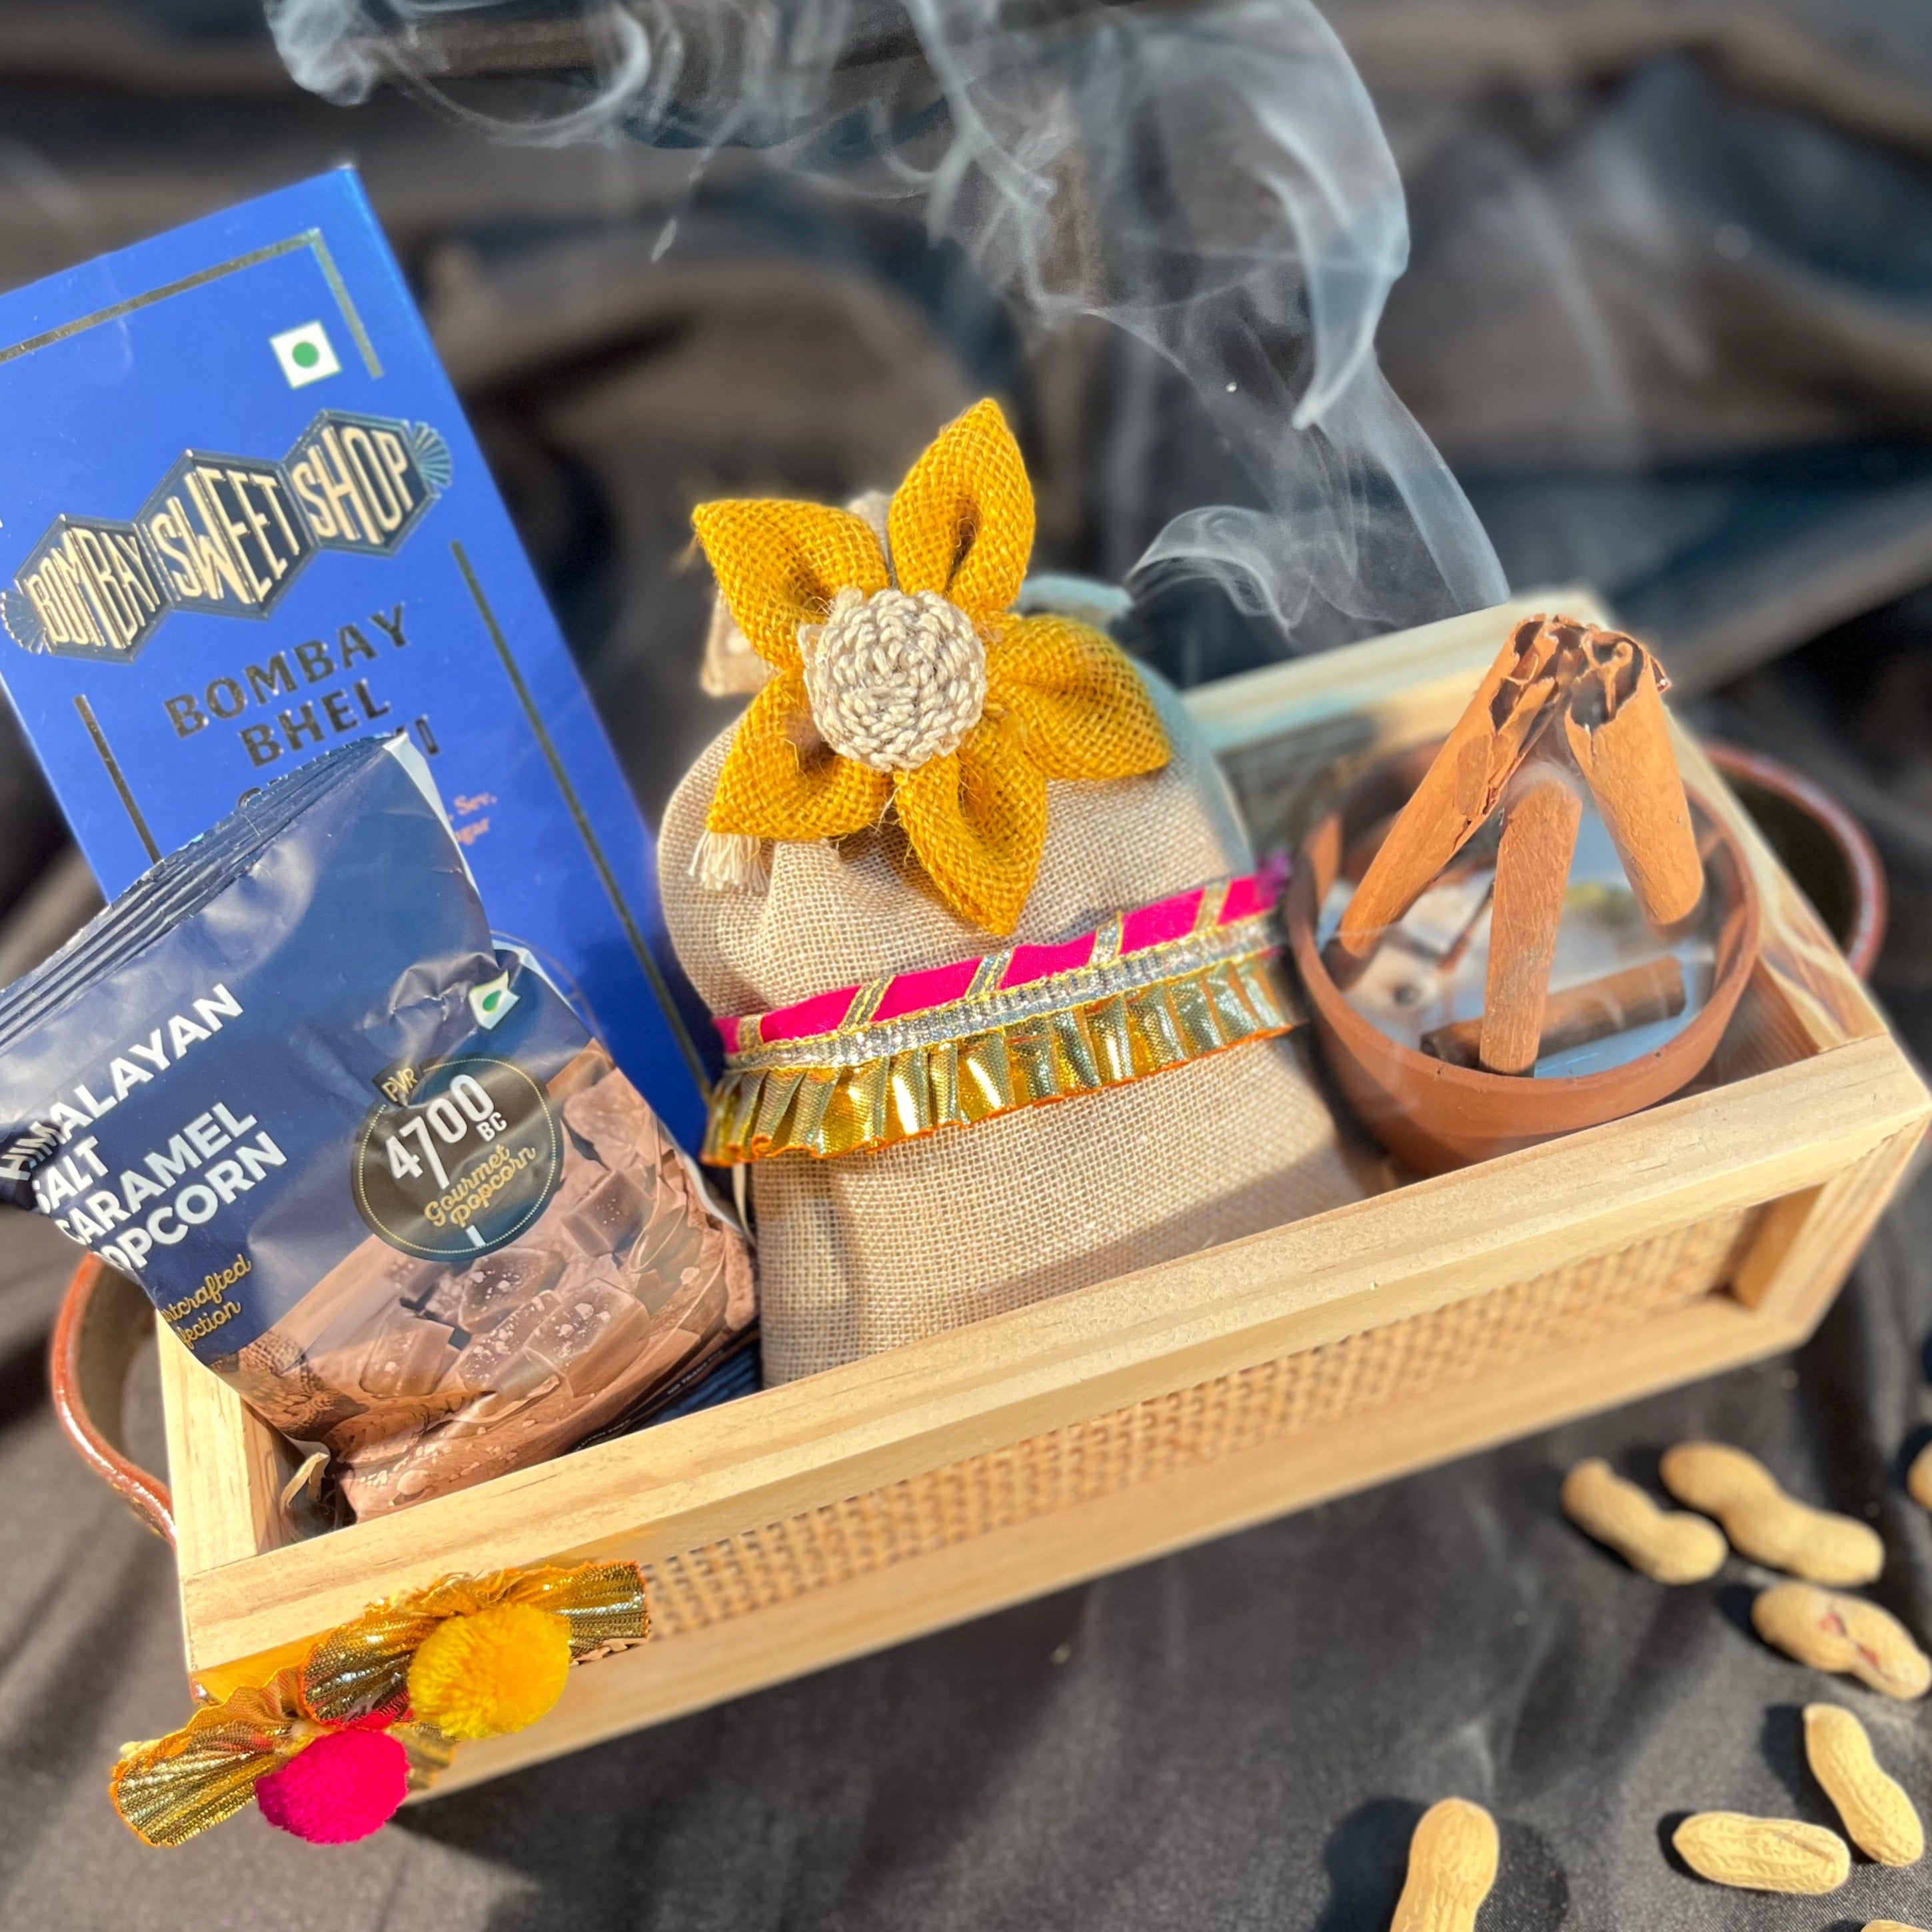 NUTRI MIRACLE Lohri Giveaway I Dry Fruit and Nut Gifts Hamper/Basket For  Birthday I Gourmet Gift I Wedding I Thanks Giving I Corporate Gifting,800gm  -